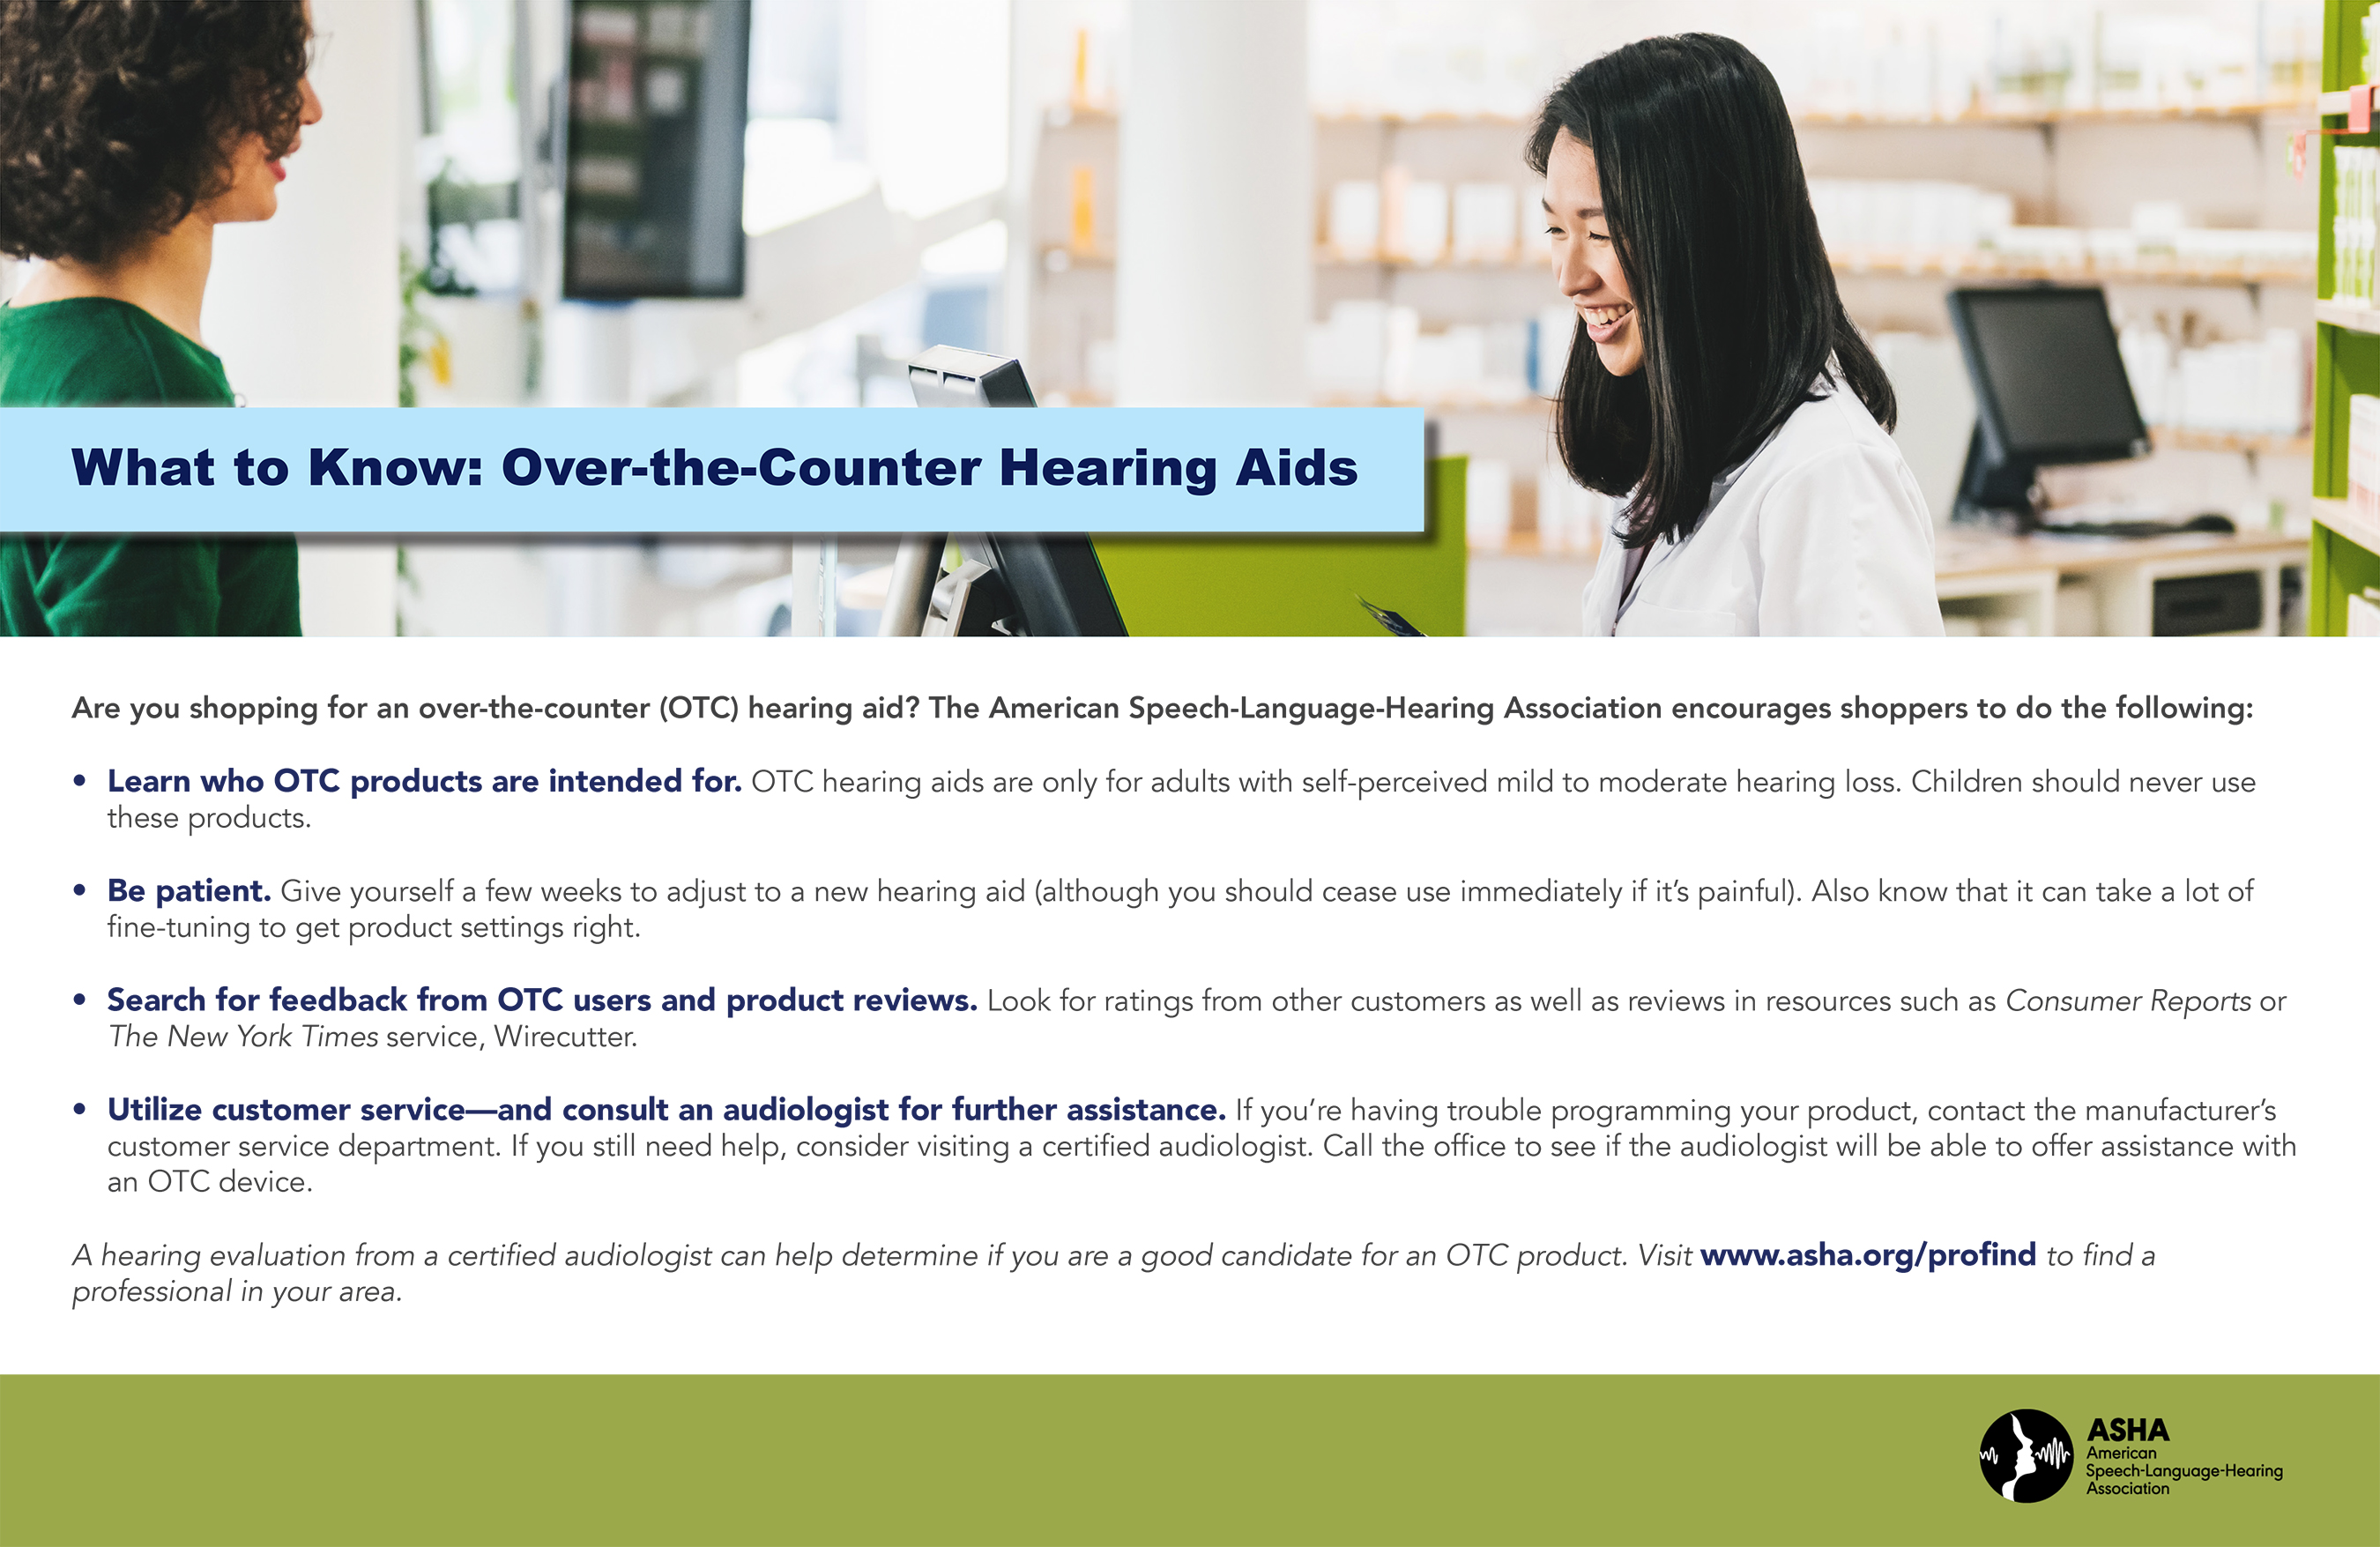 What to Know: Over-the-Counter Hearing Aids